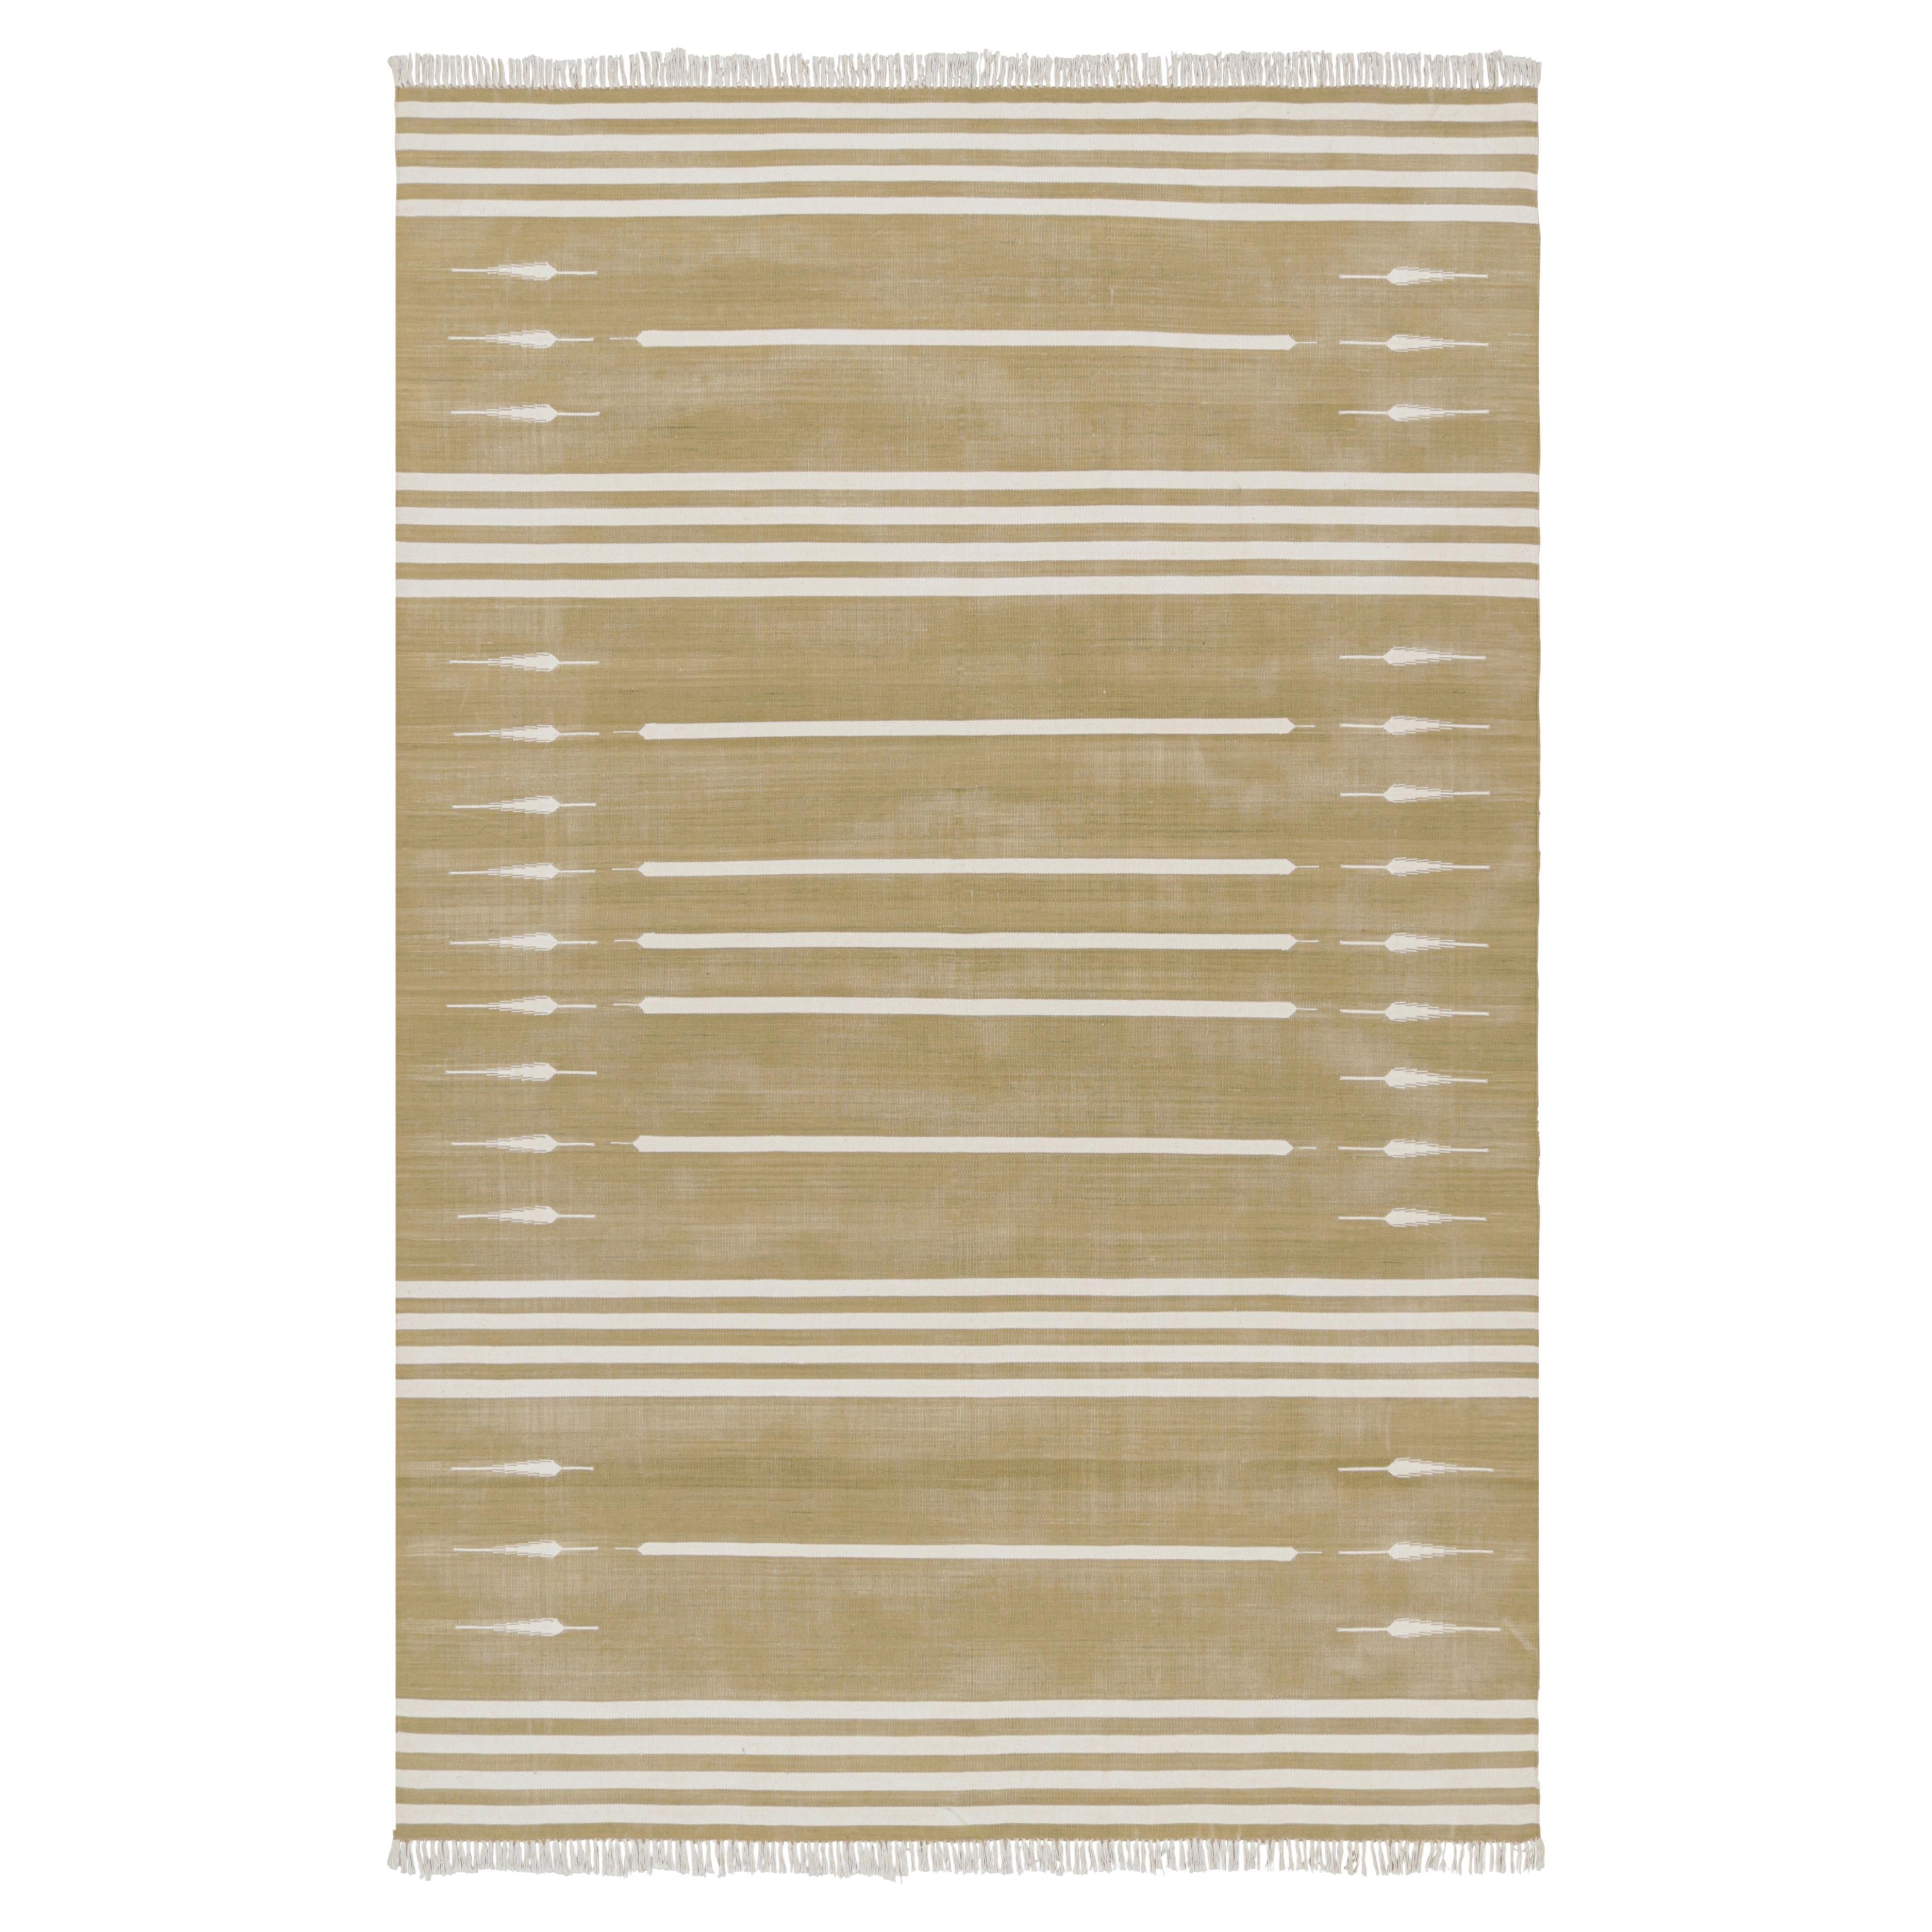 Rug & Kilim’s Contemporary Dhurrie Rug in Beige and White Stripes